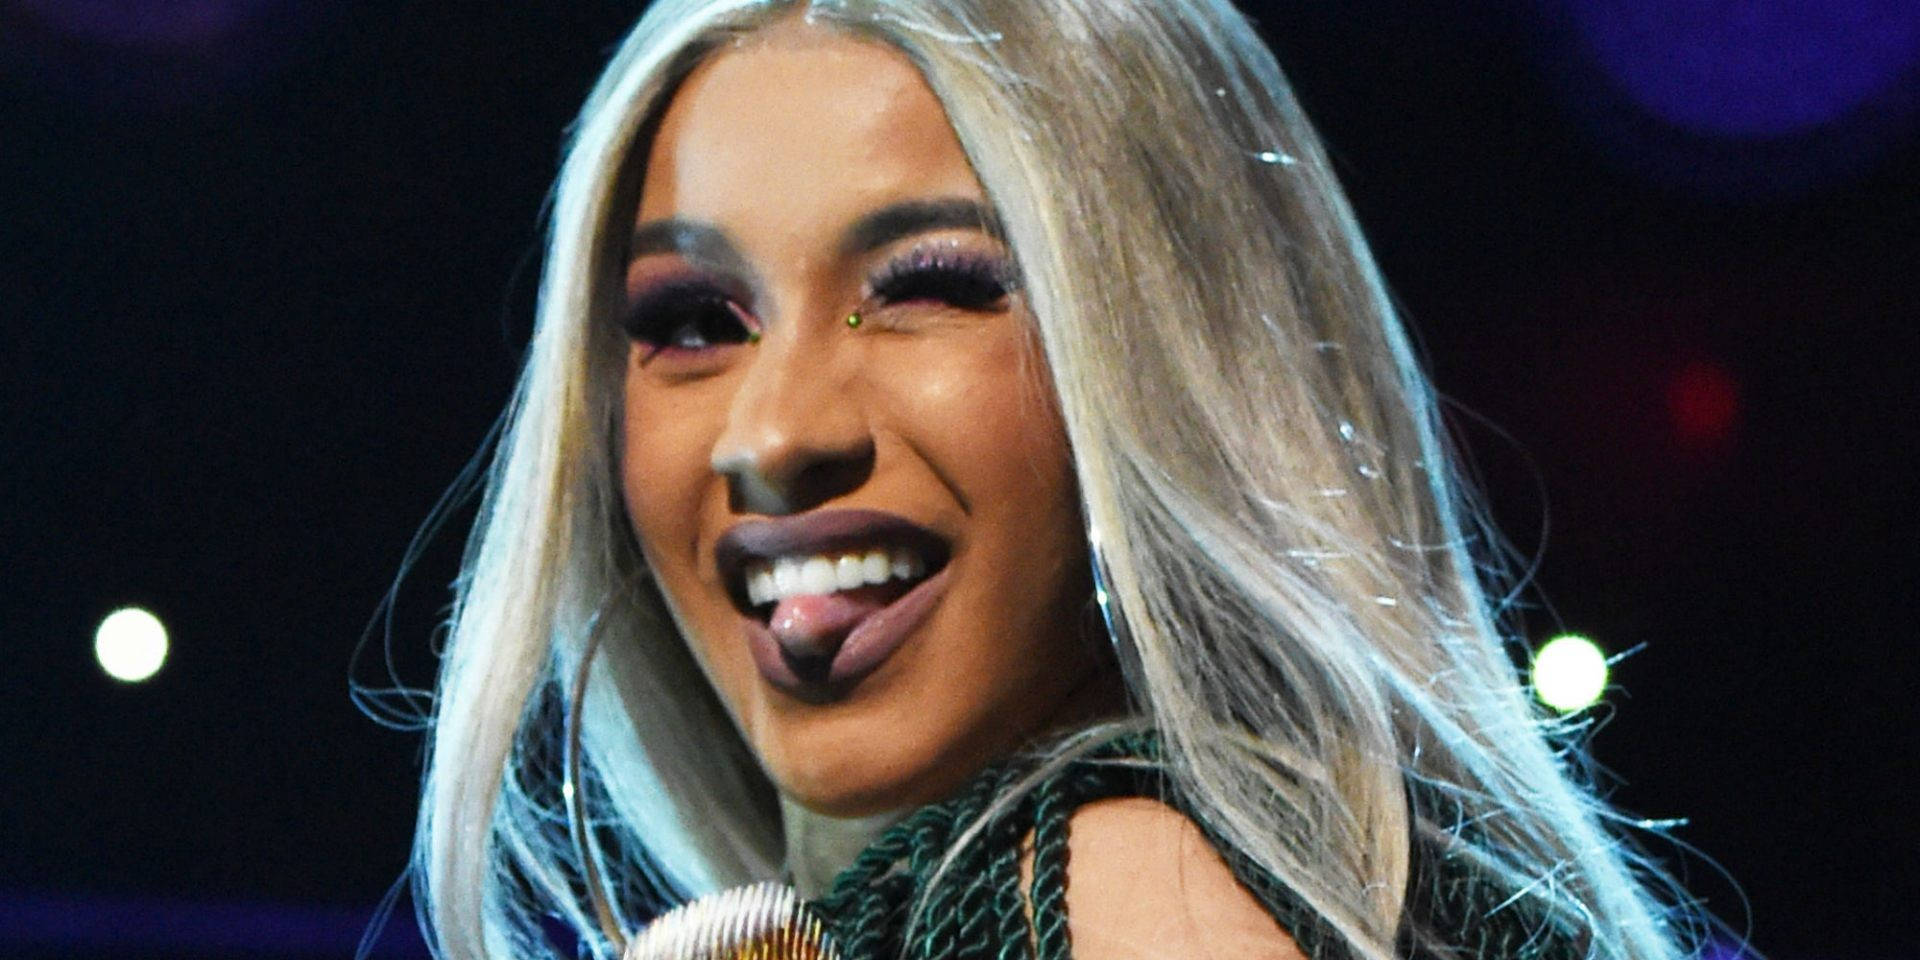 Cardi B Winking With Tongue Out Background